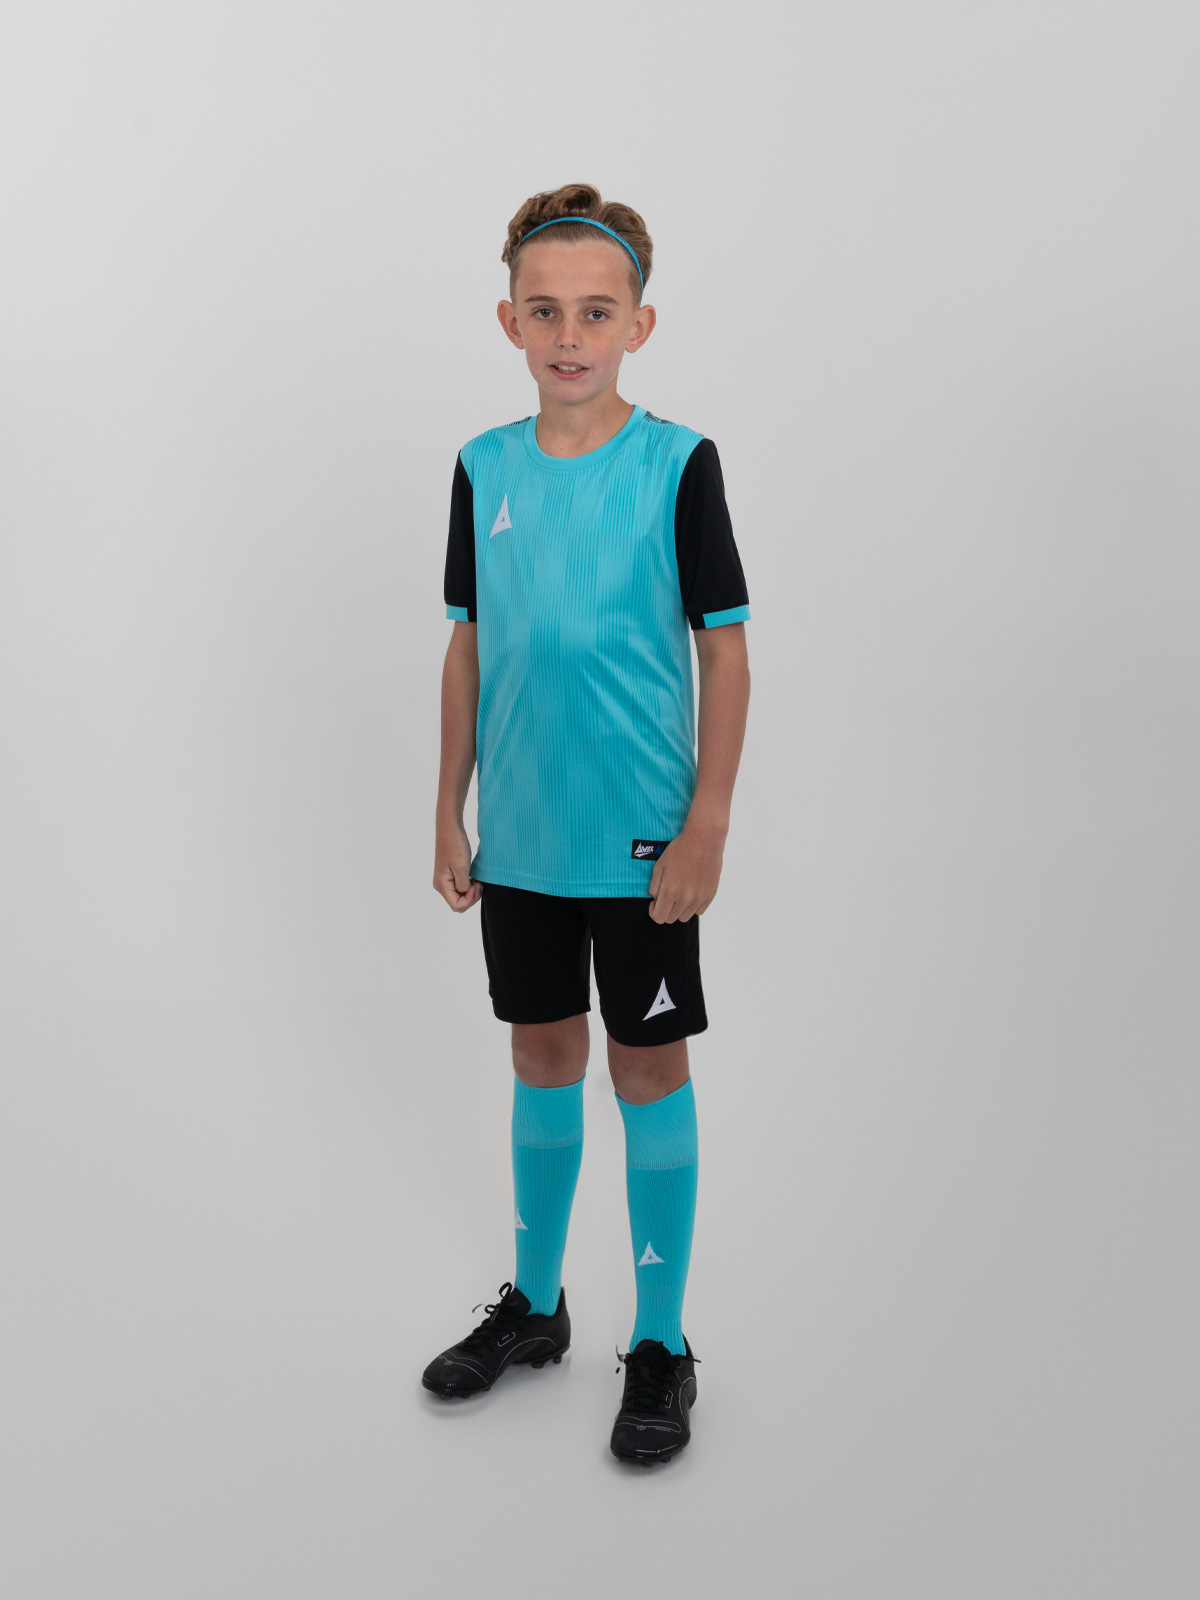 a child wearing a junior football kit which is light blue and black